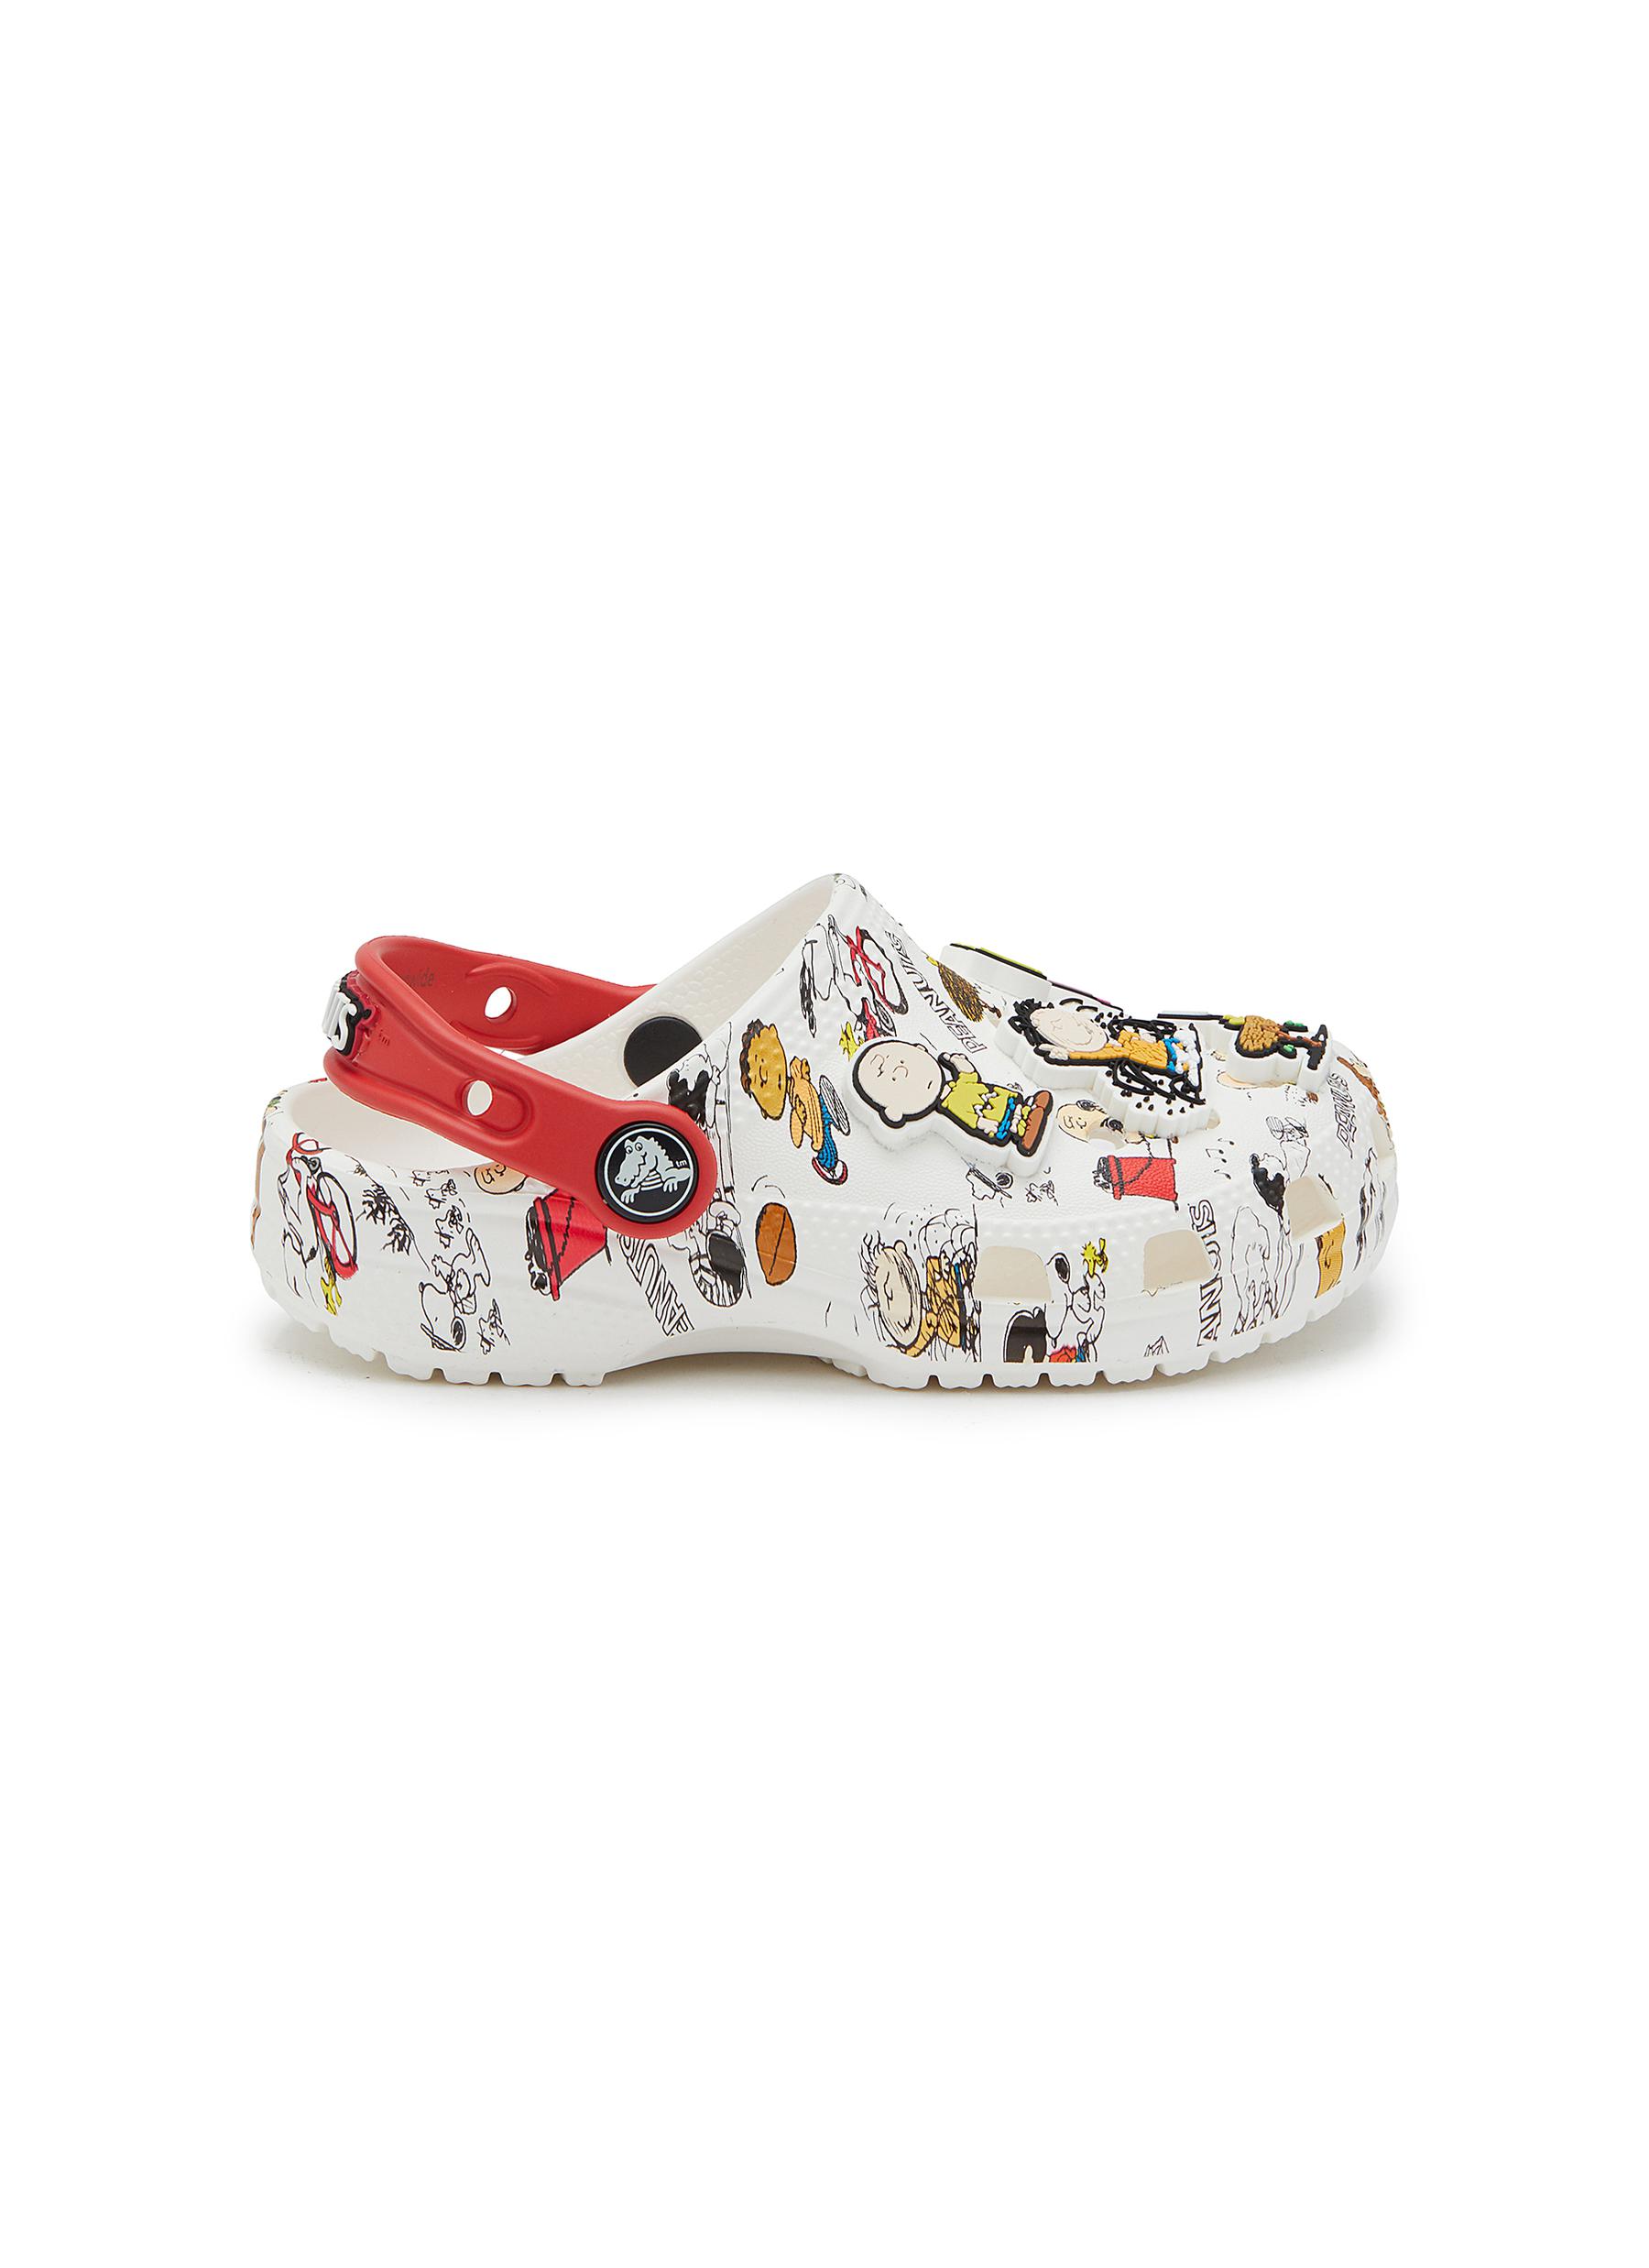 x Peanuts Toddlers Classic Clogs